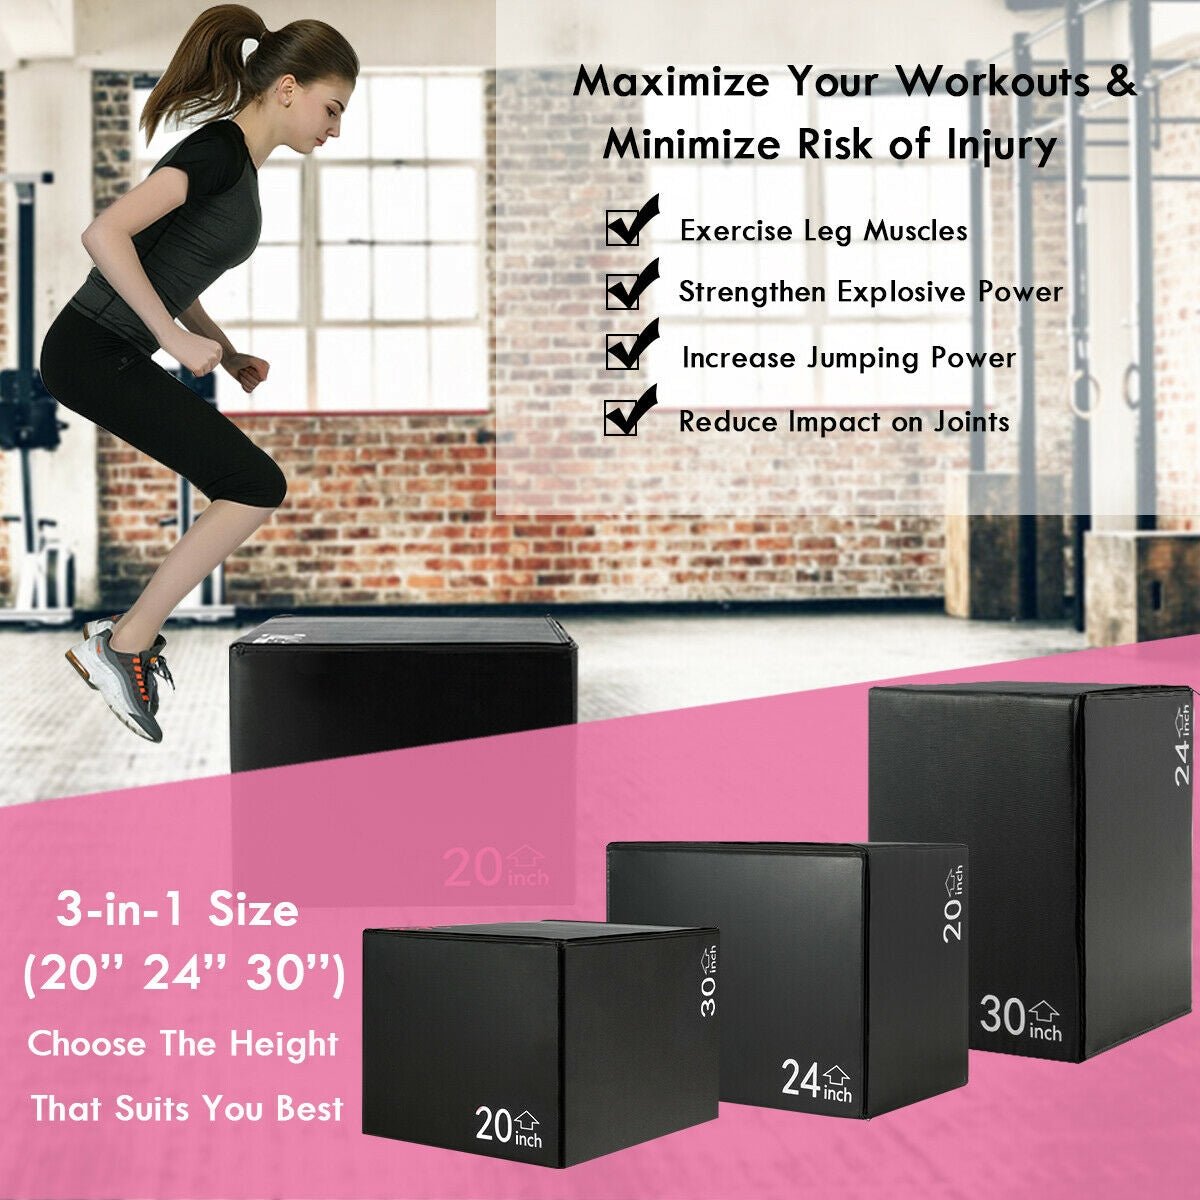 3-in-1 Foam Jumping Box for Jump Training at Gallery Canada